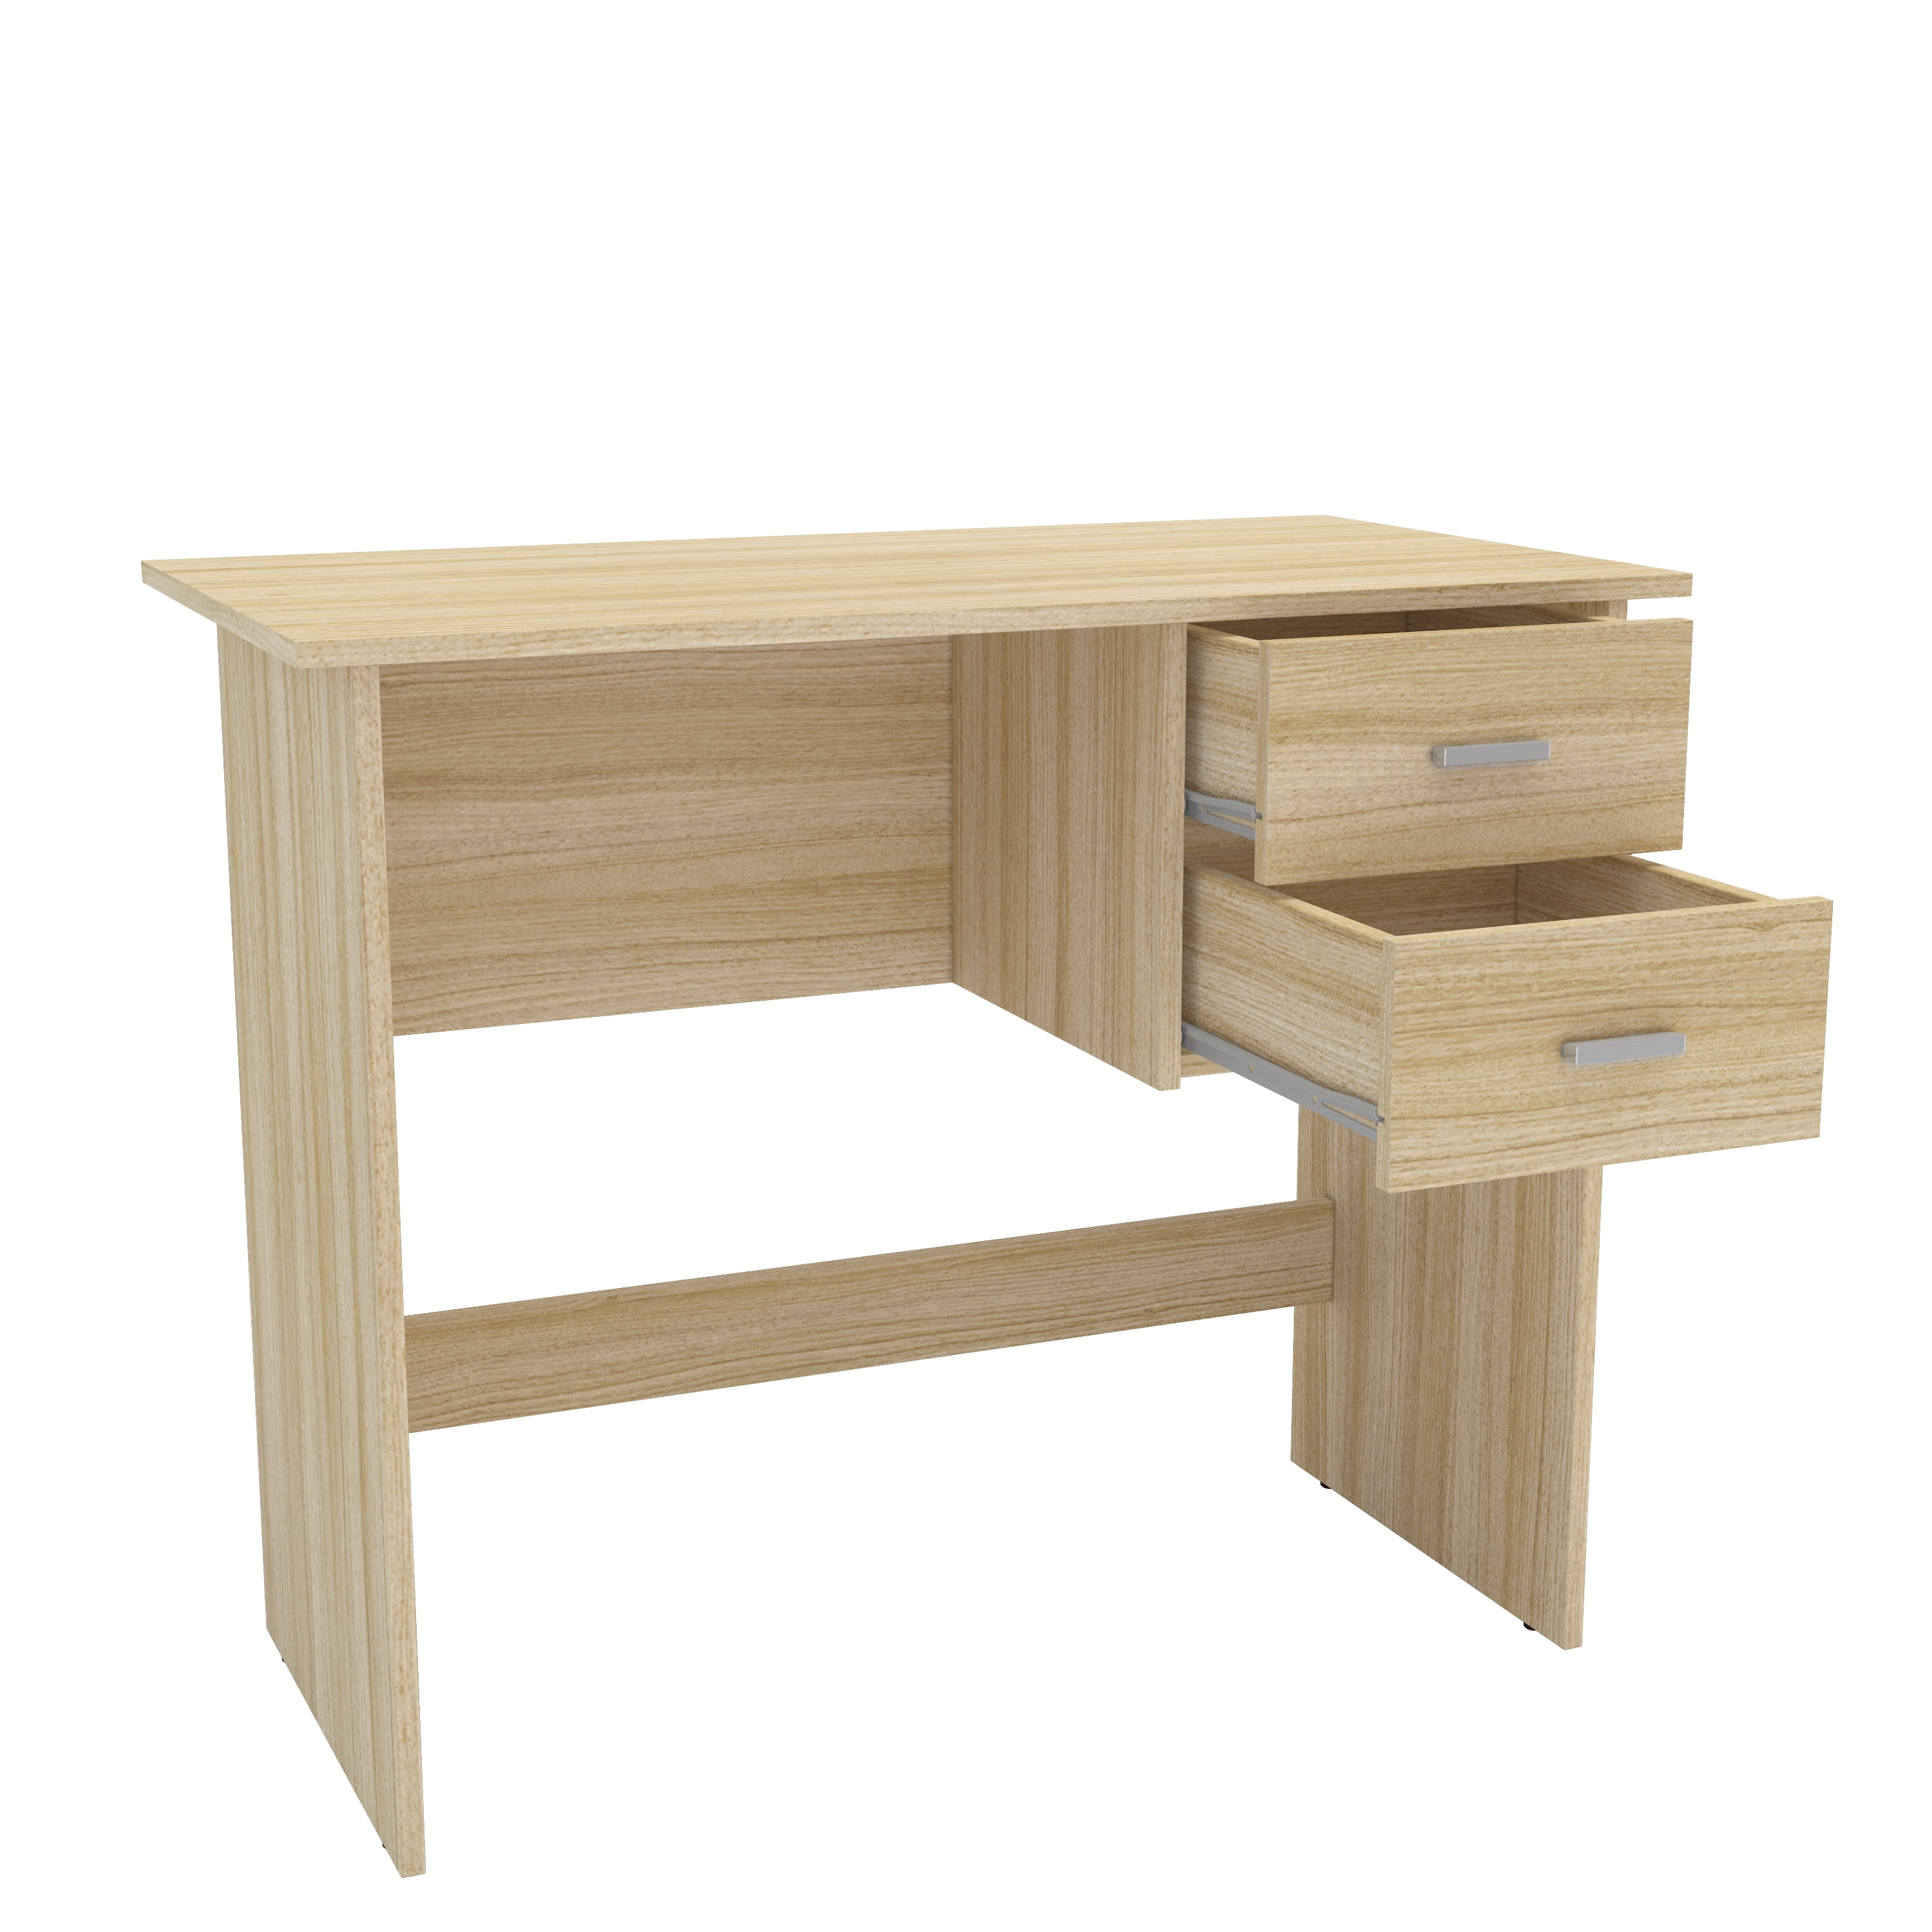 Polifurniture Budapest 35.5 2 Writing with Desk Drawers in. Oak